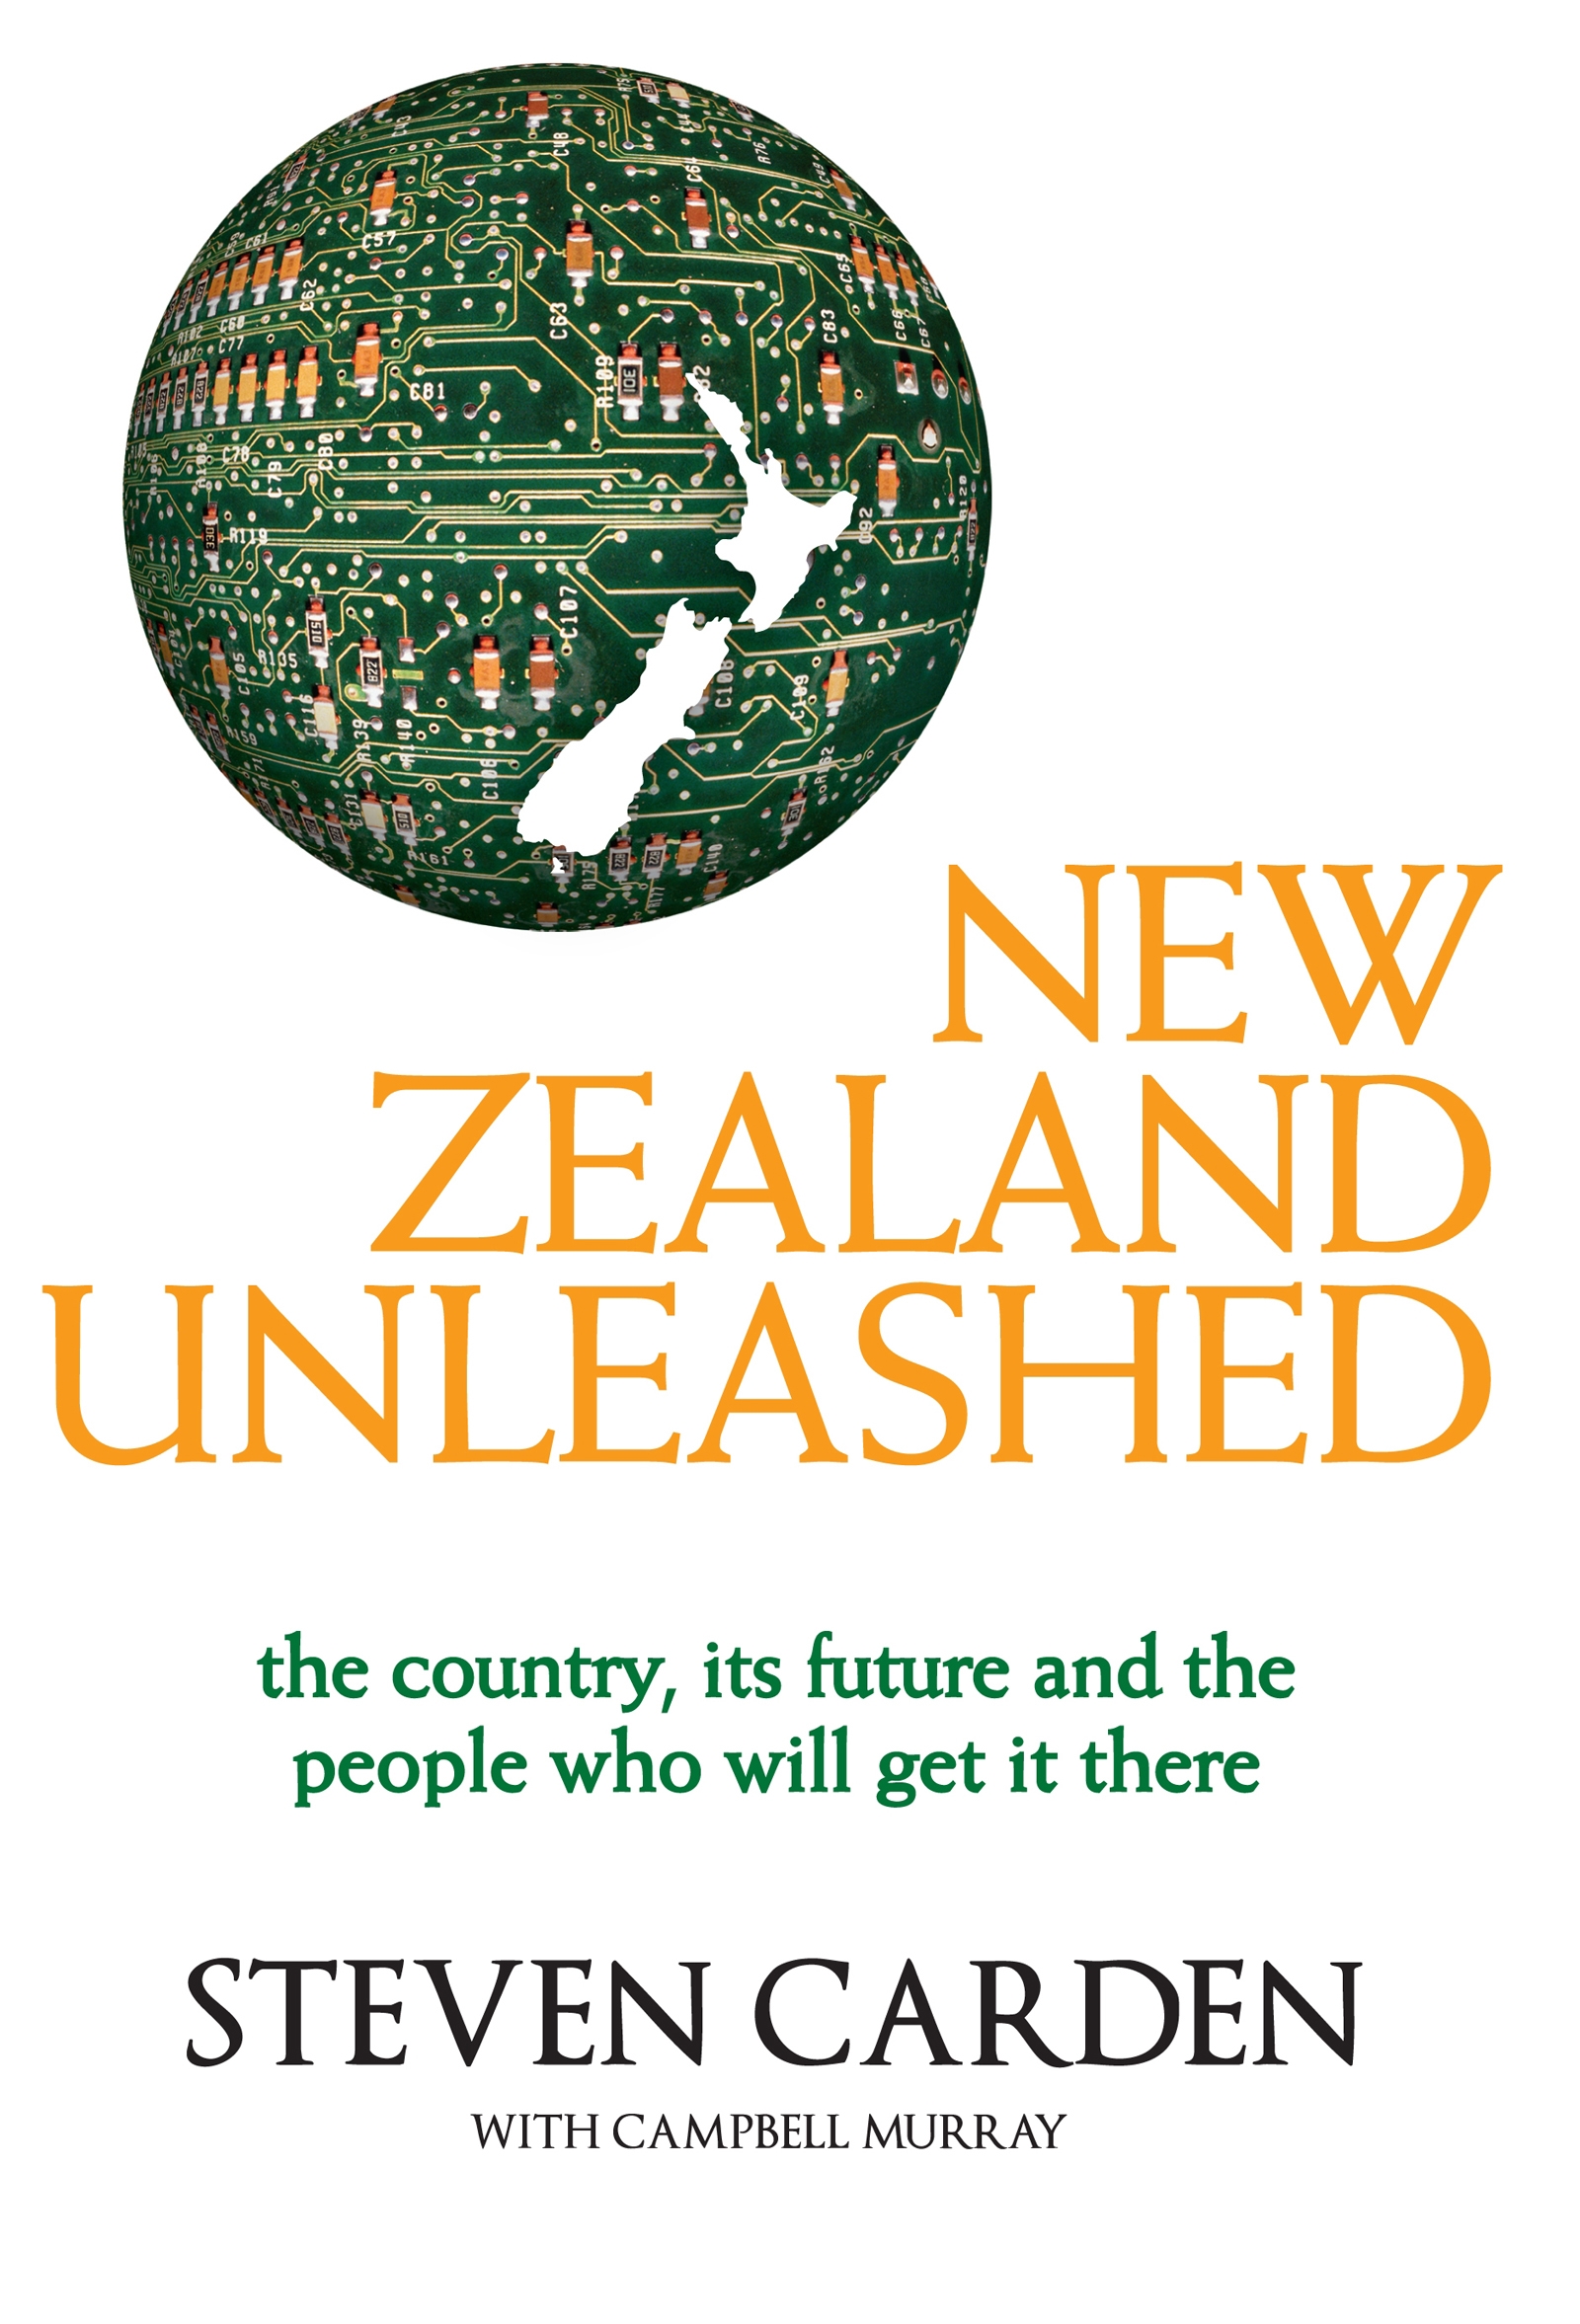 Image result for new zealand unleashed